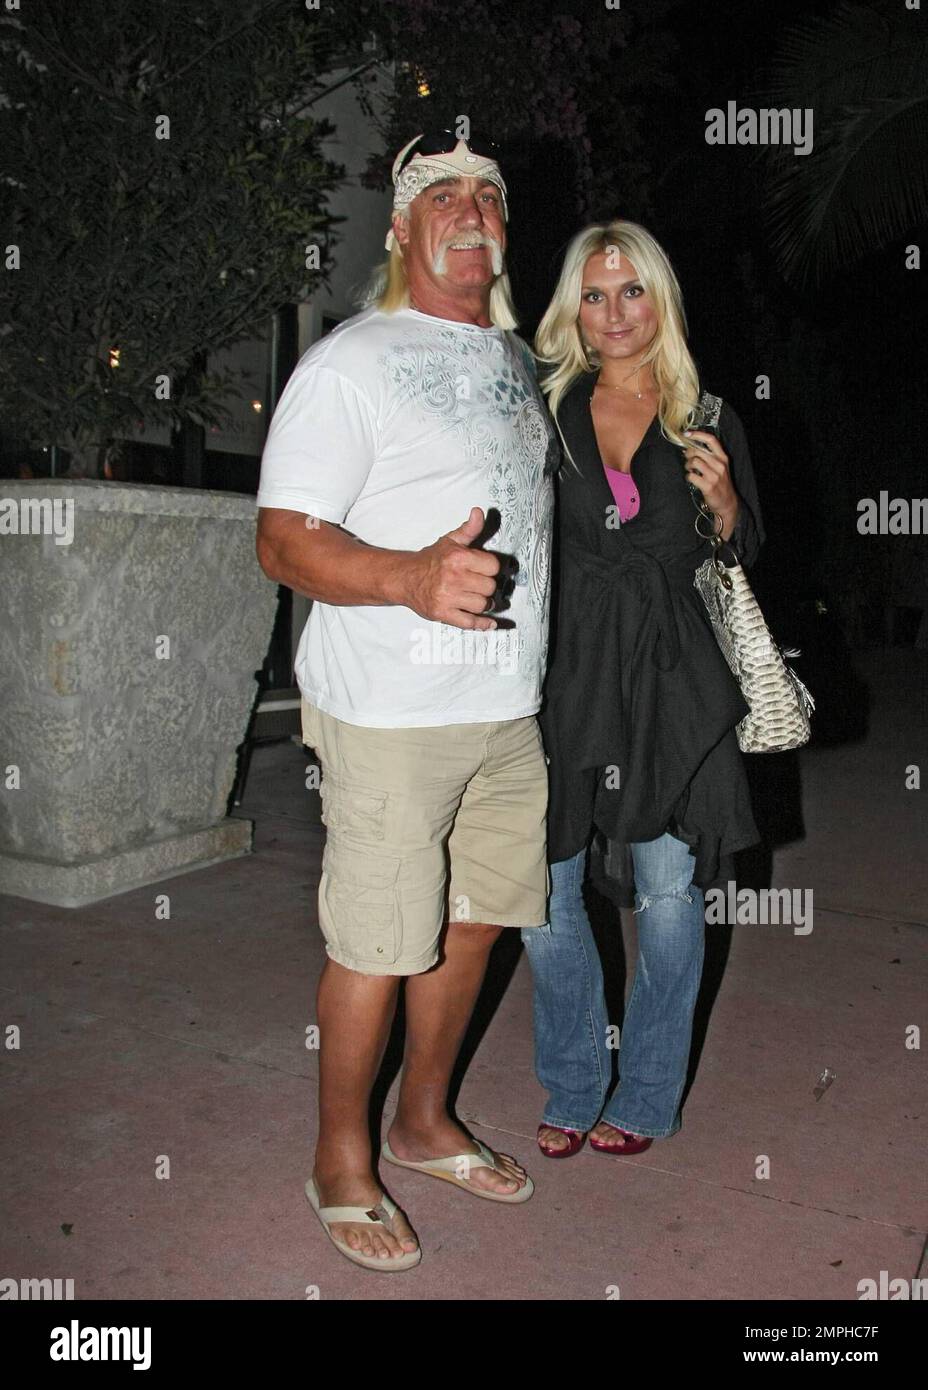 Exclusive!! Brooke Hogan, star of the VH1 TV show 